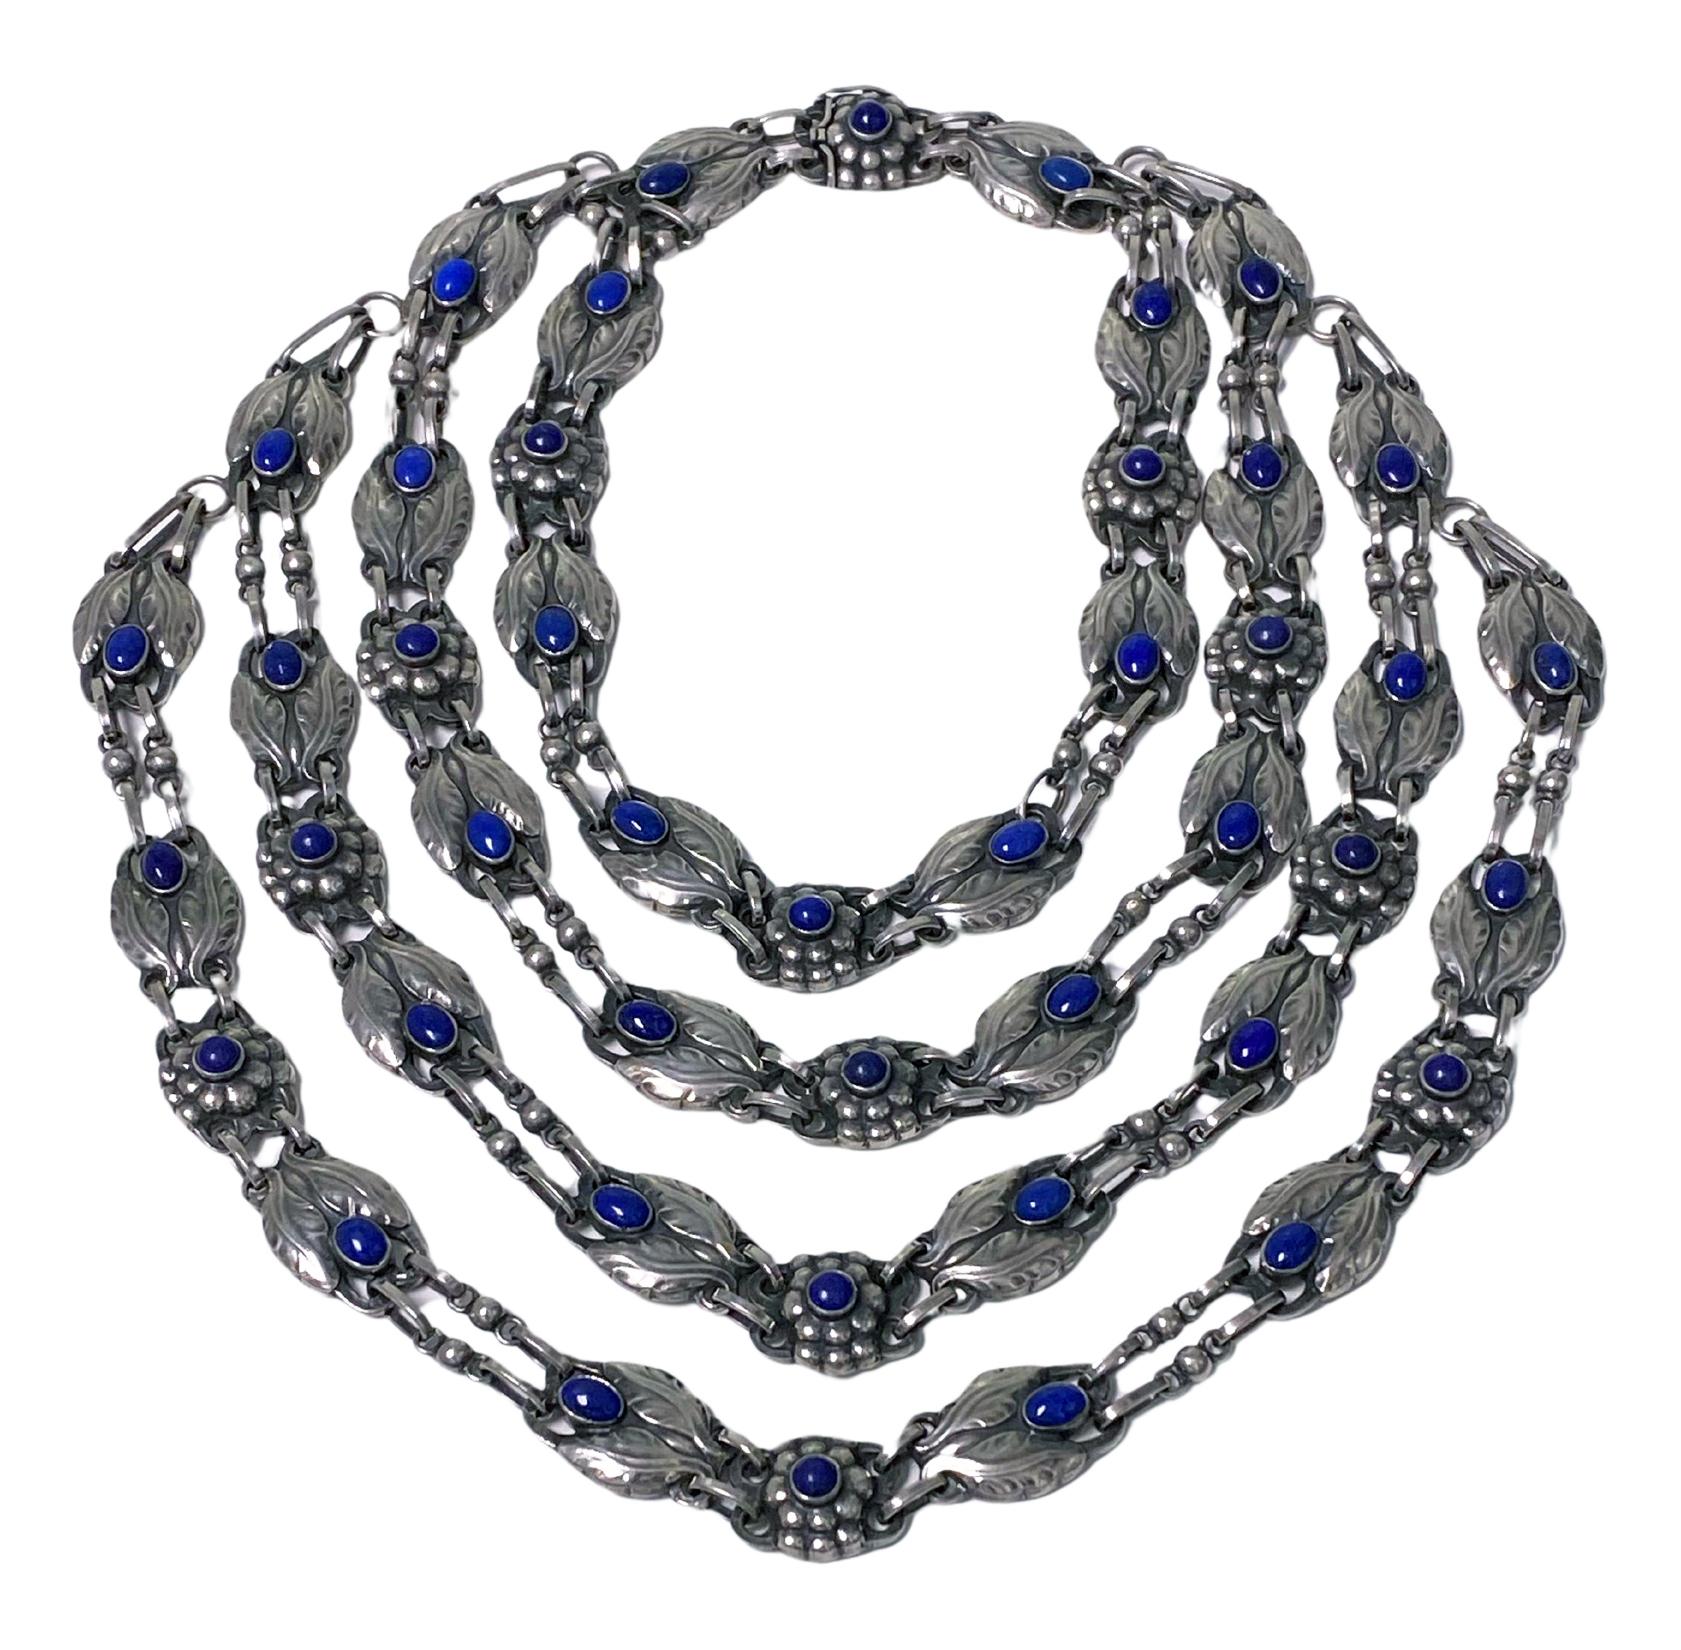 Very rare collectors piece Georg Jensen Lapis and Sterling Silver Necklace, four-tiered graduated strand design No 1, C.1933. Bezel set oval and round lapis with stylised bud leaves and berries interval links. Full Jensen marks and GI marks to